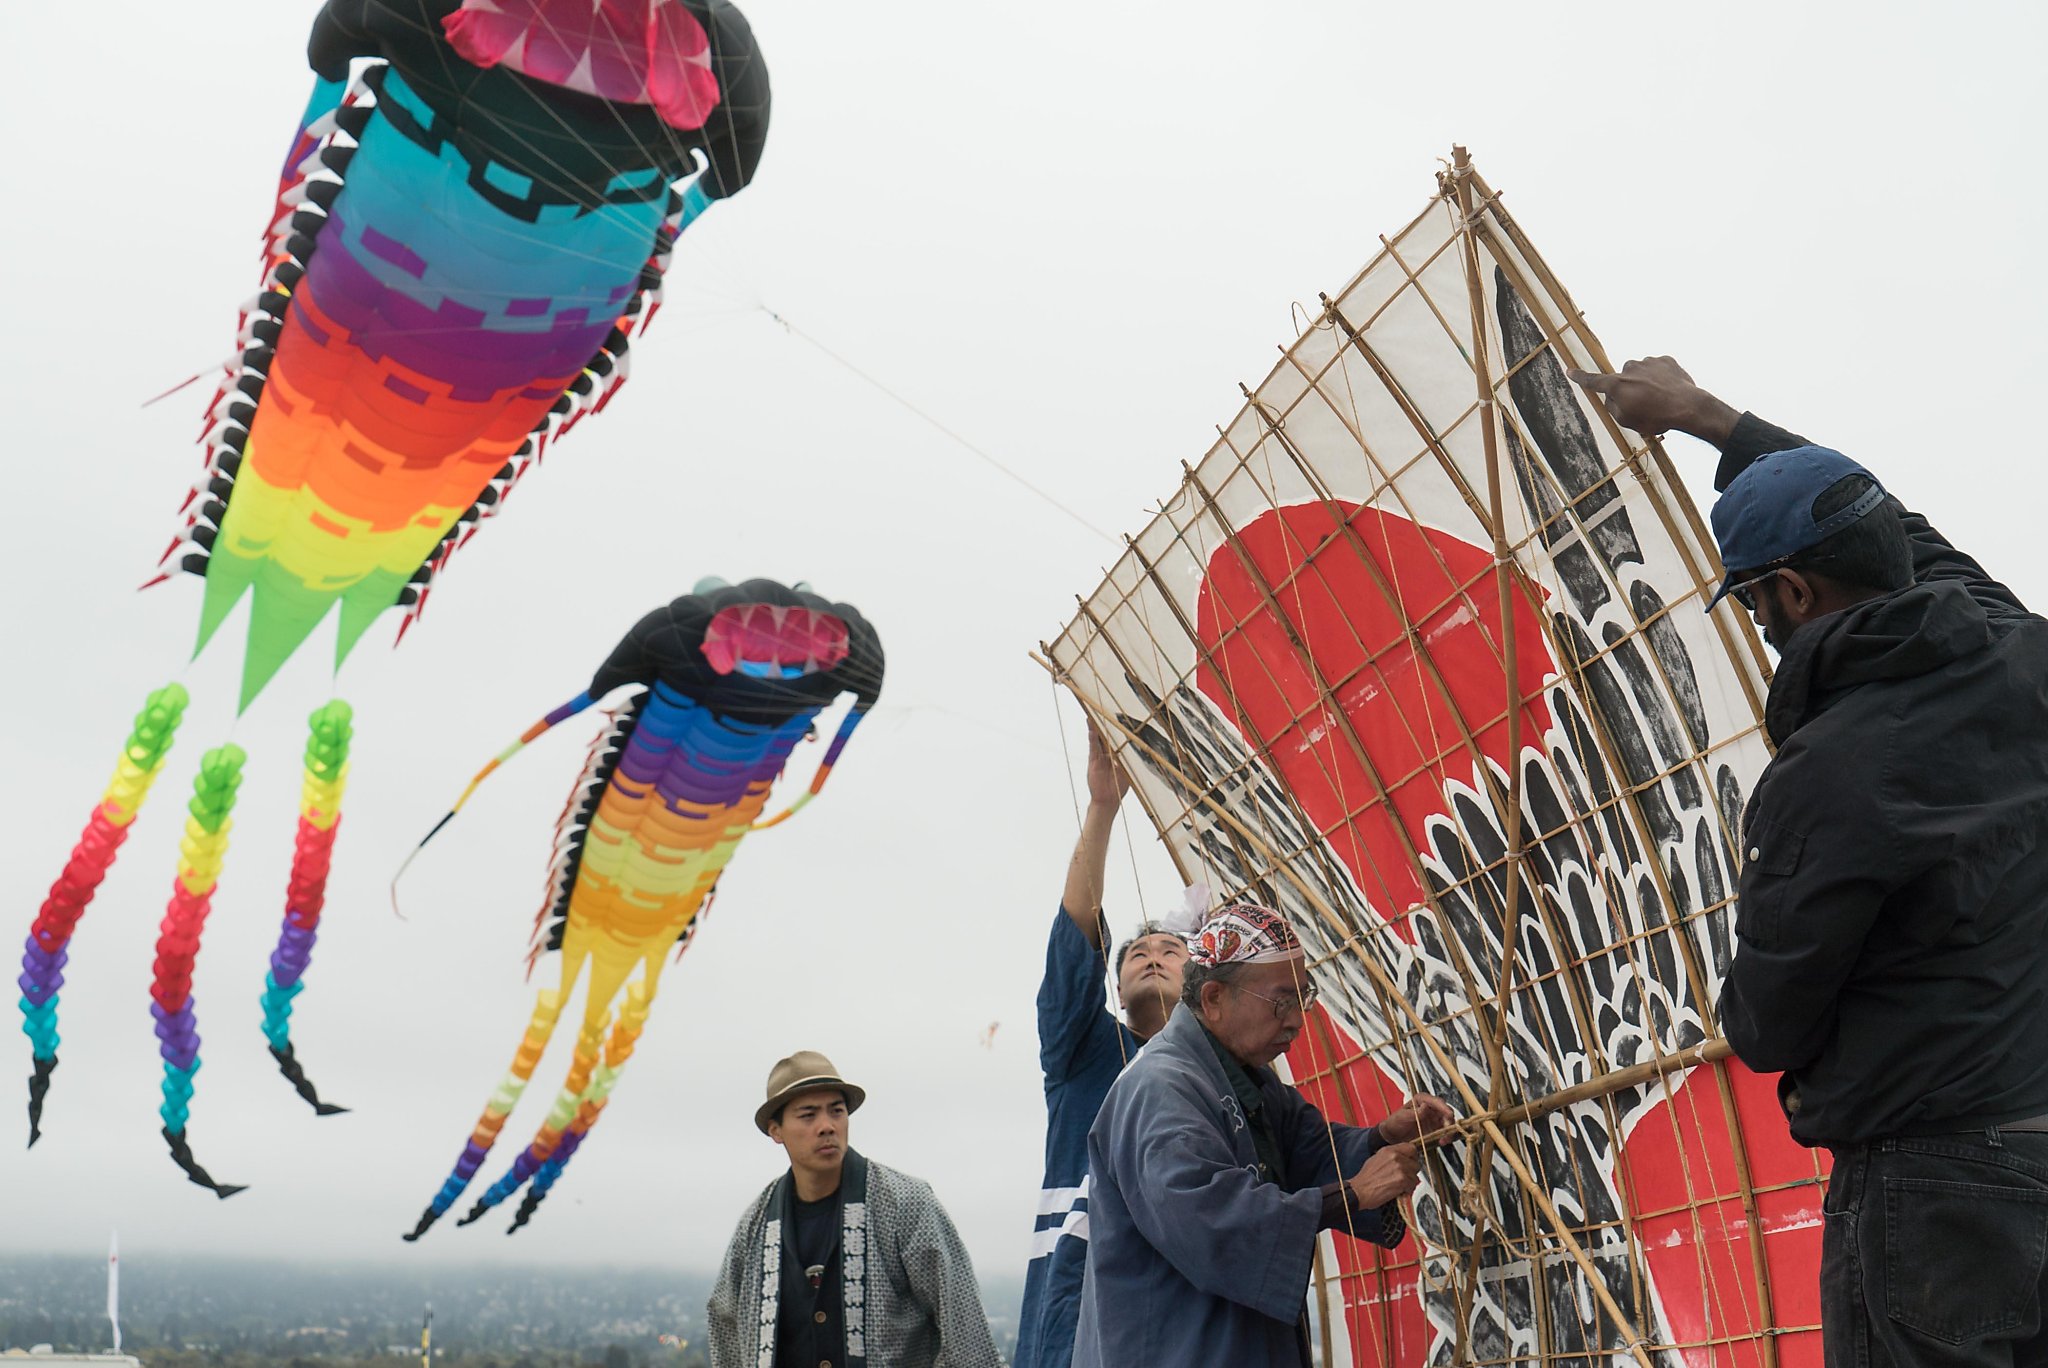 Excitement in the air at Berkeley Kite Festival